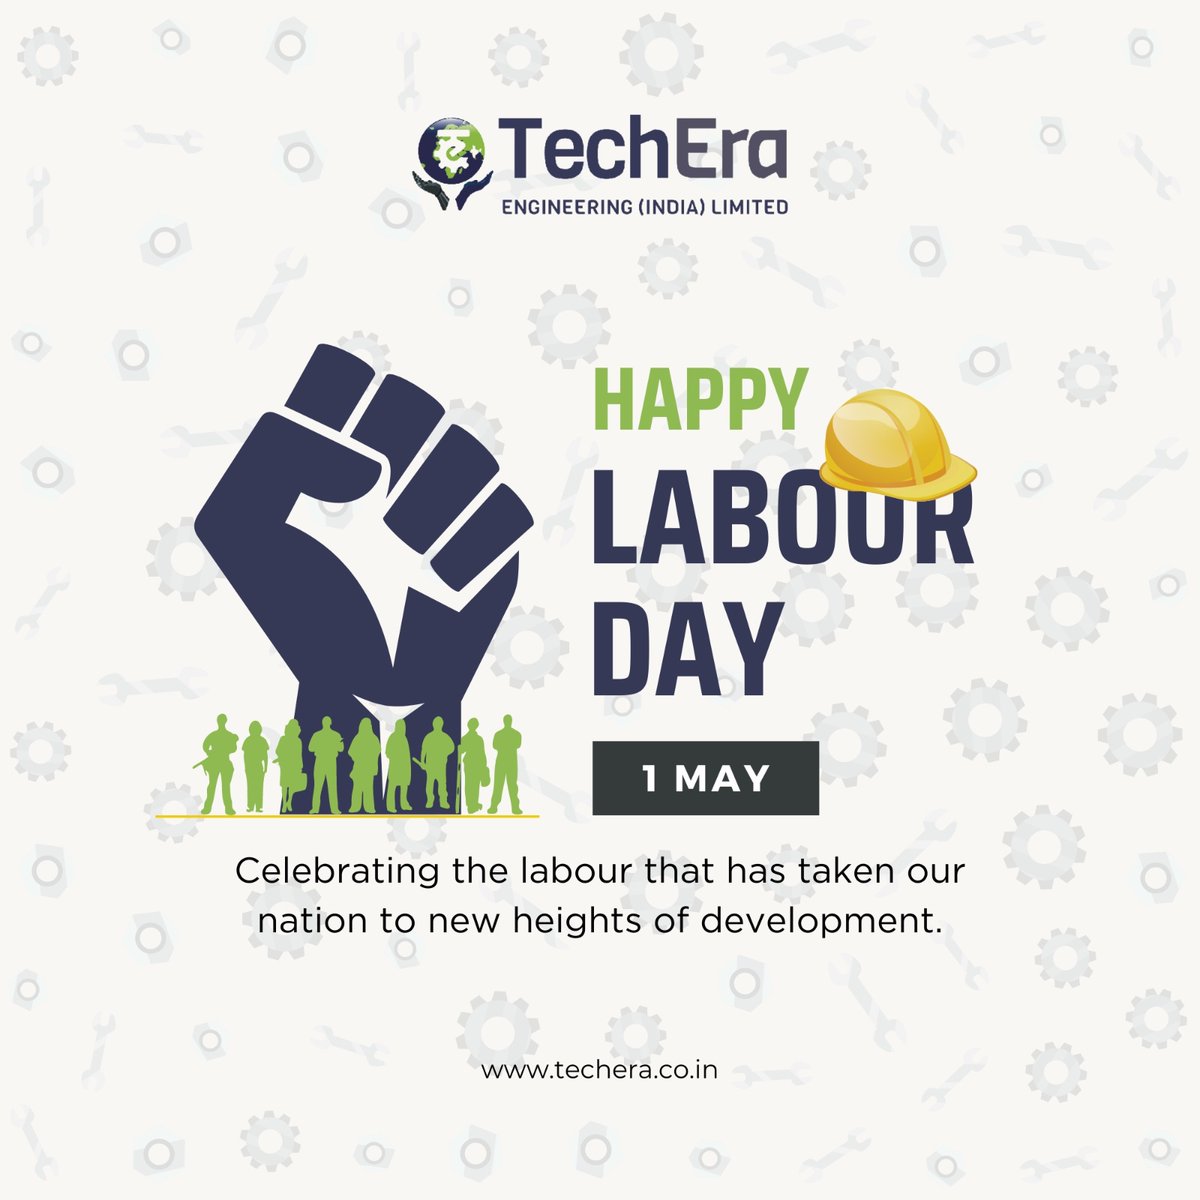 𝗛𝗮𝗽𝗽𝘆 𝗟𝗮𝗯𝗼𝘂𝗿 𝗗𝗮𝘆
Celebrating the labour that has taken our nation to the new heights of development

#1stmay #labourday #maharashtra #techera #techeraengineering #aerospaceindustry #aerospacemanufacturing #defense #automation #automationsolutions #defenseindustry